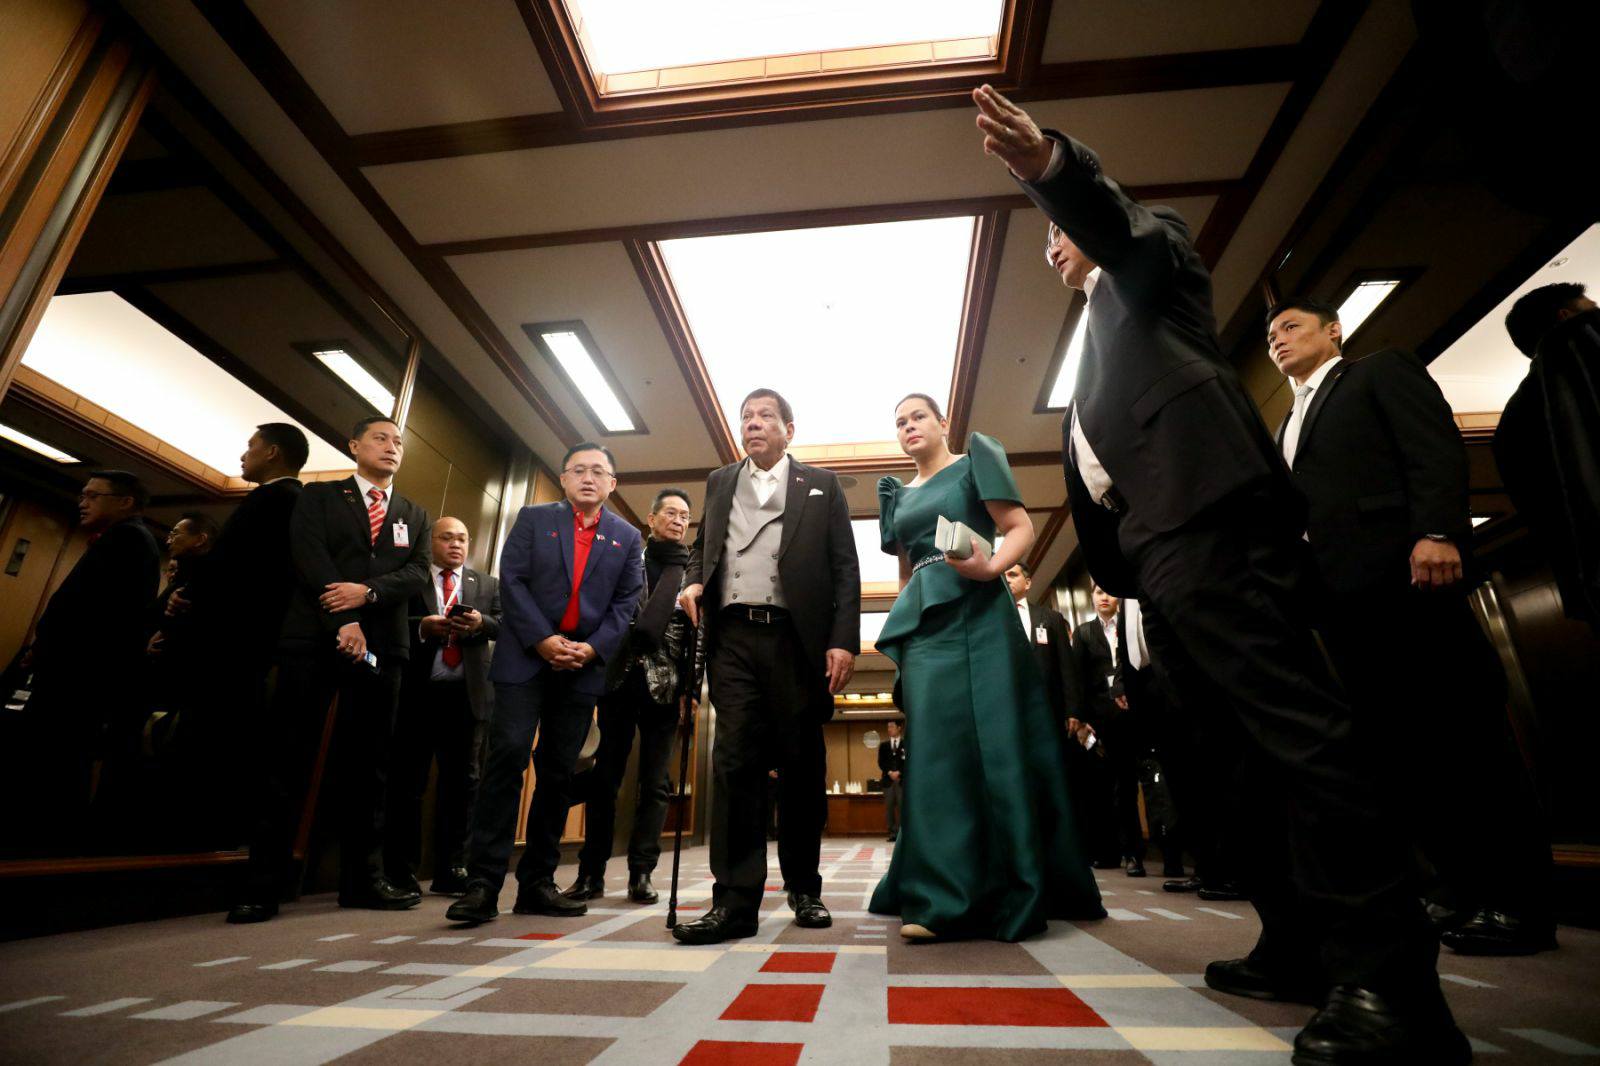 President Rodrigo Duterte walked with a cane during the accession rites of Emperor Naruhito in Japan. <i></noscript>Photo: Presidential Communications Office/FB</i>